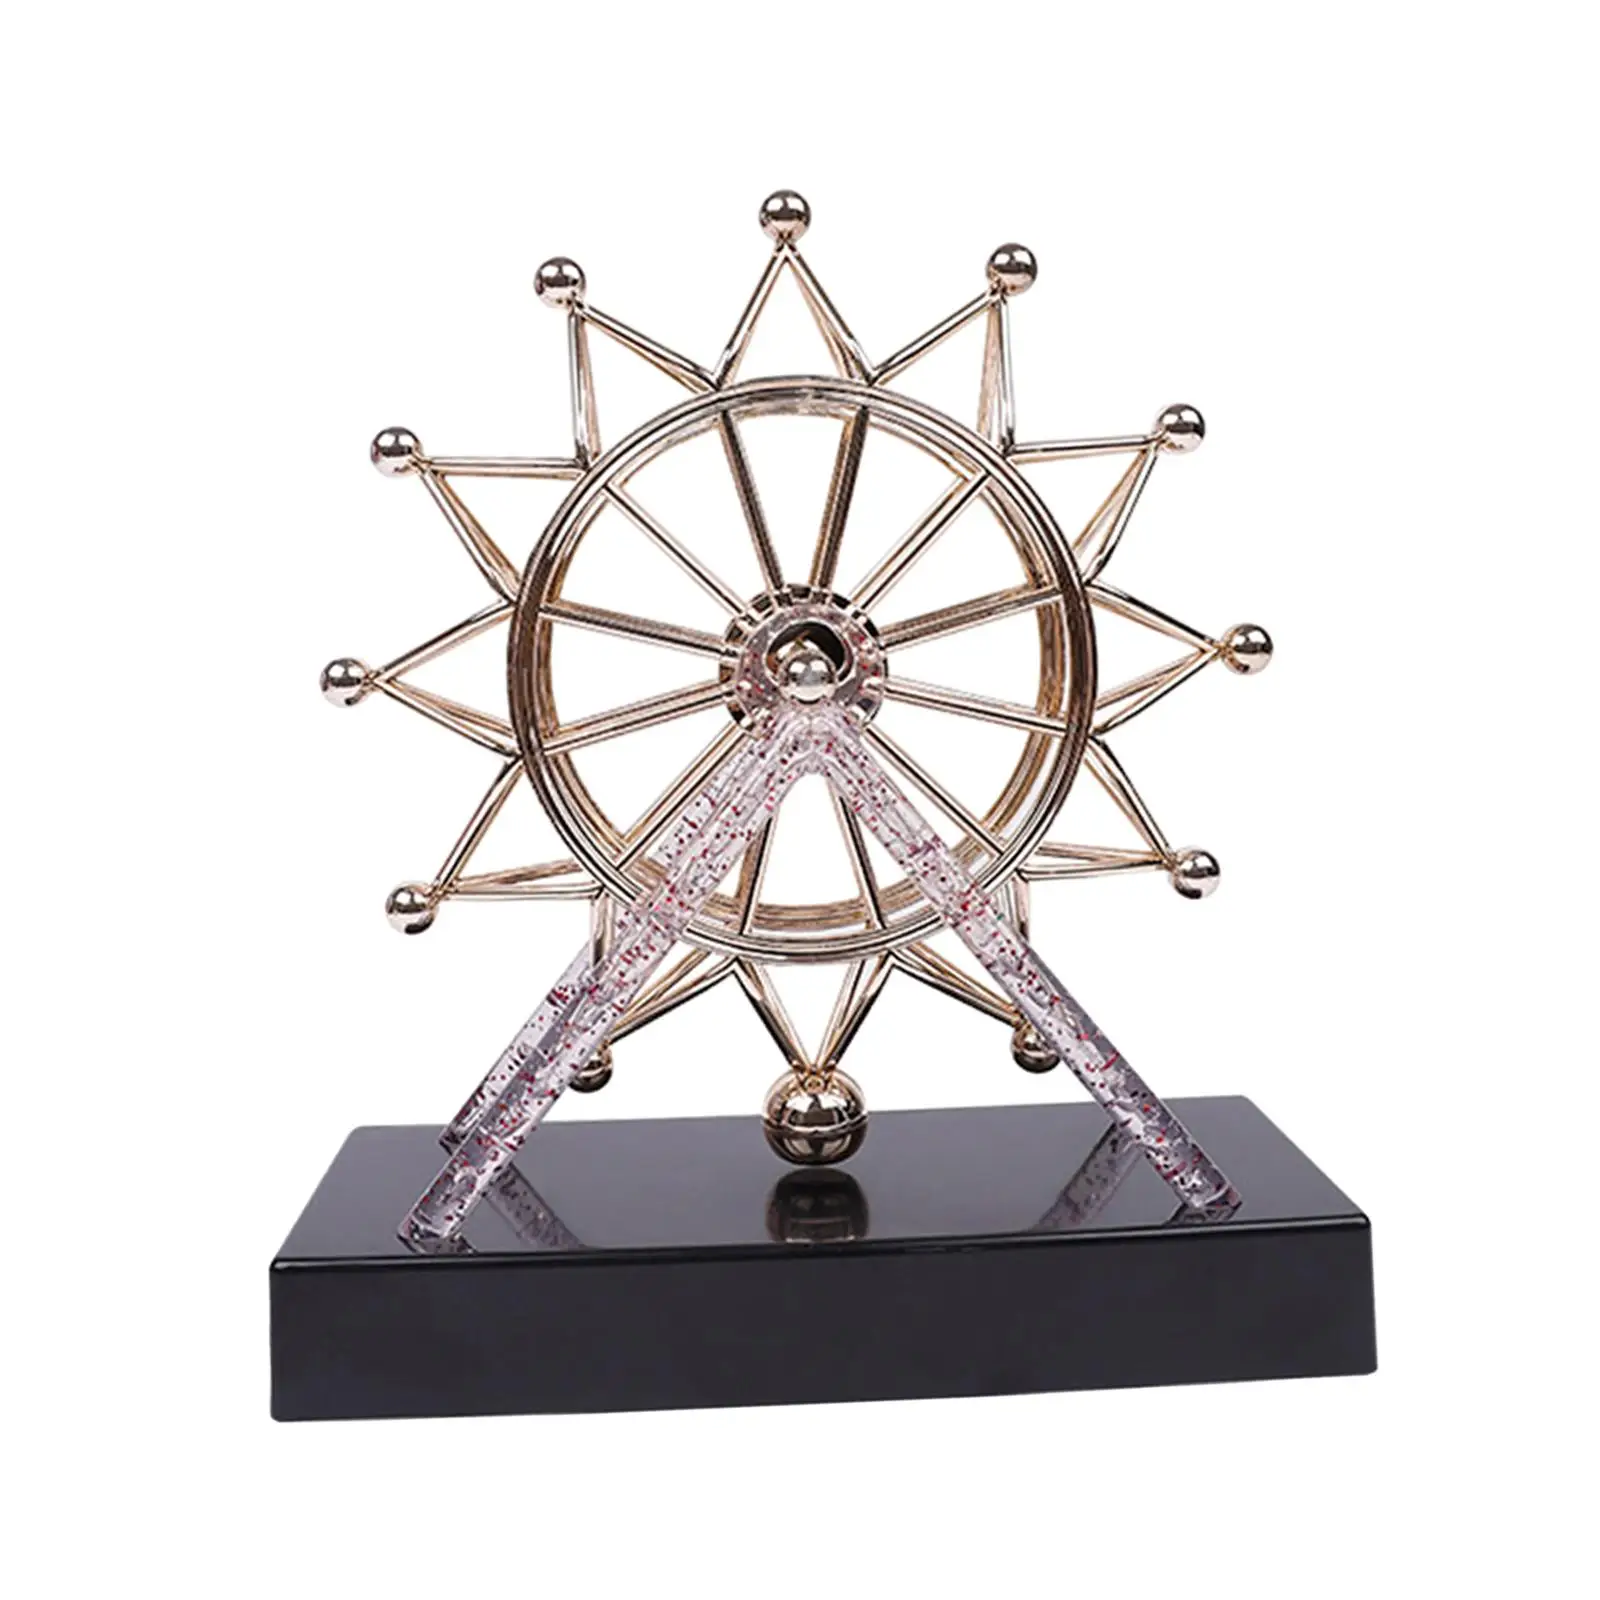 

Ferris Wheel Ornament Art Ornament Collectable Perpetual Motion Decoration for Entrance Table Festival Bookcase Home Decorations